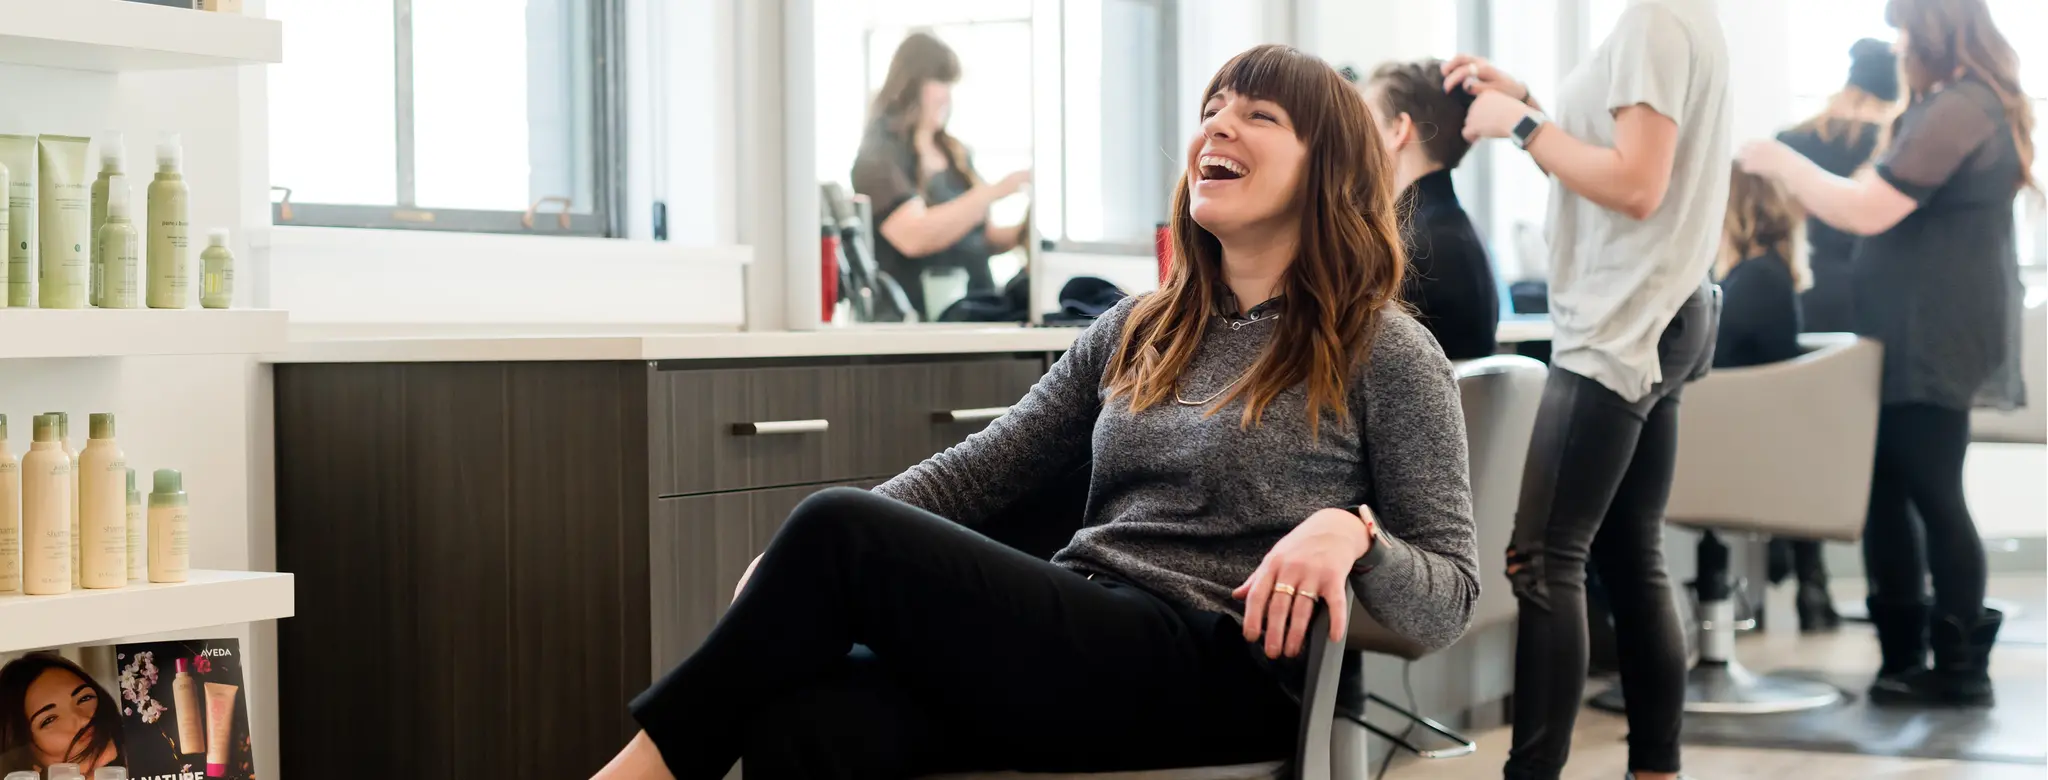 woman sitting in chair laughing in salon